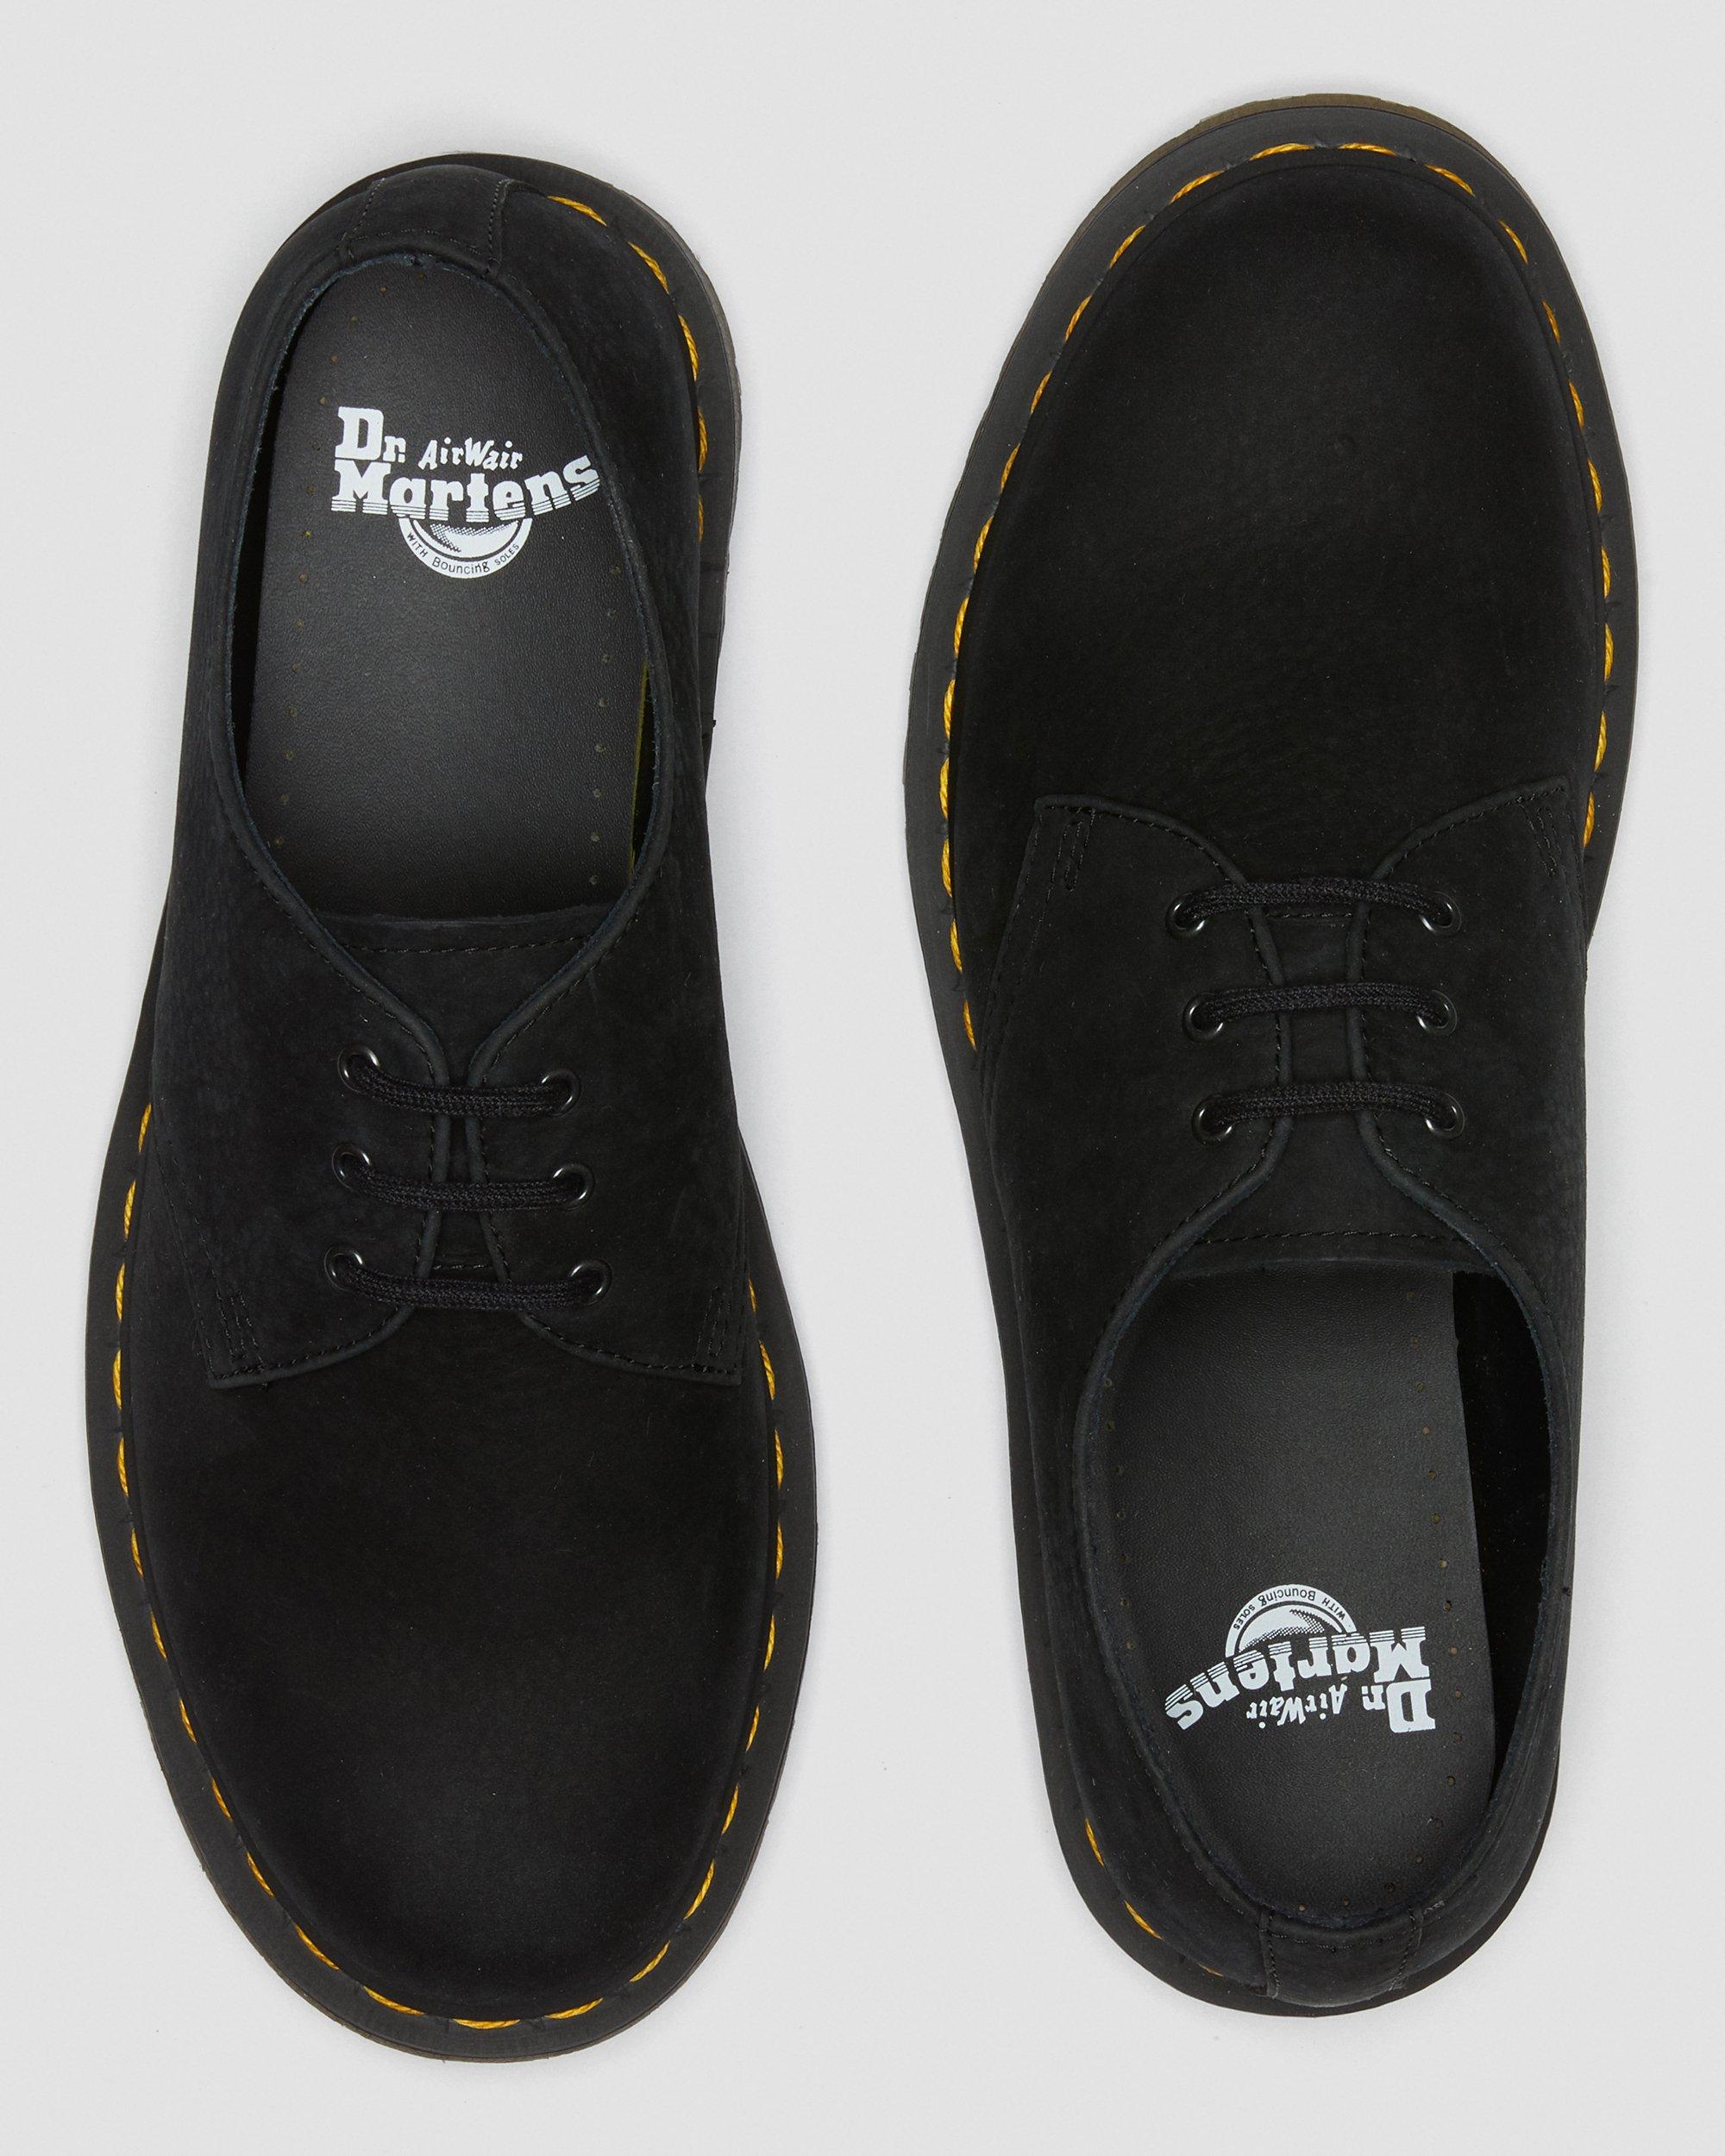 DR MARTENS 1461 Nubuck Leather Oxford Shoes